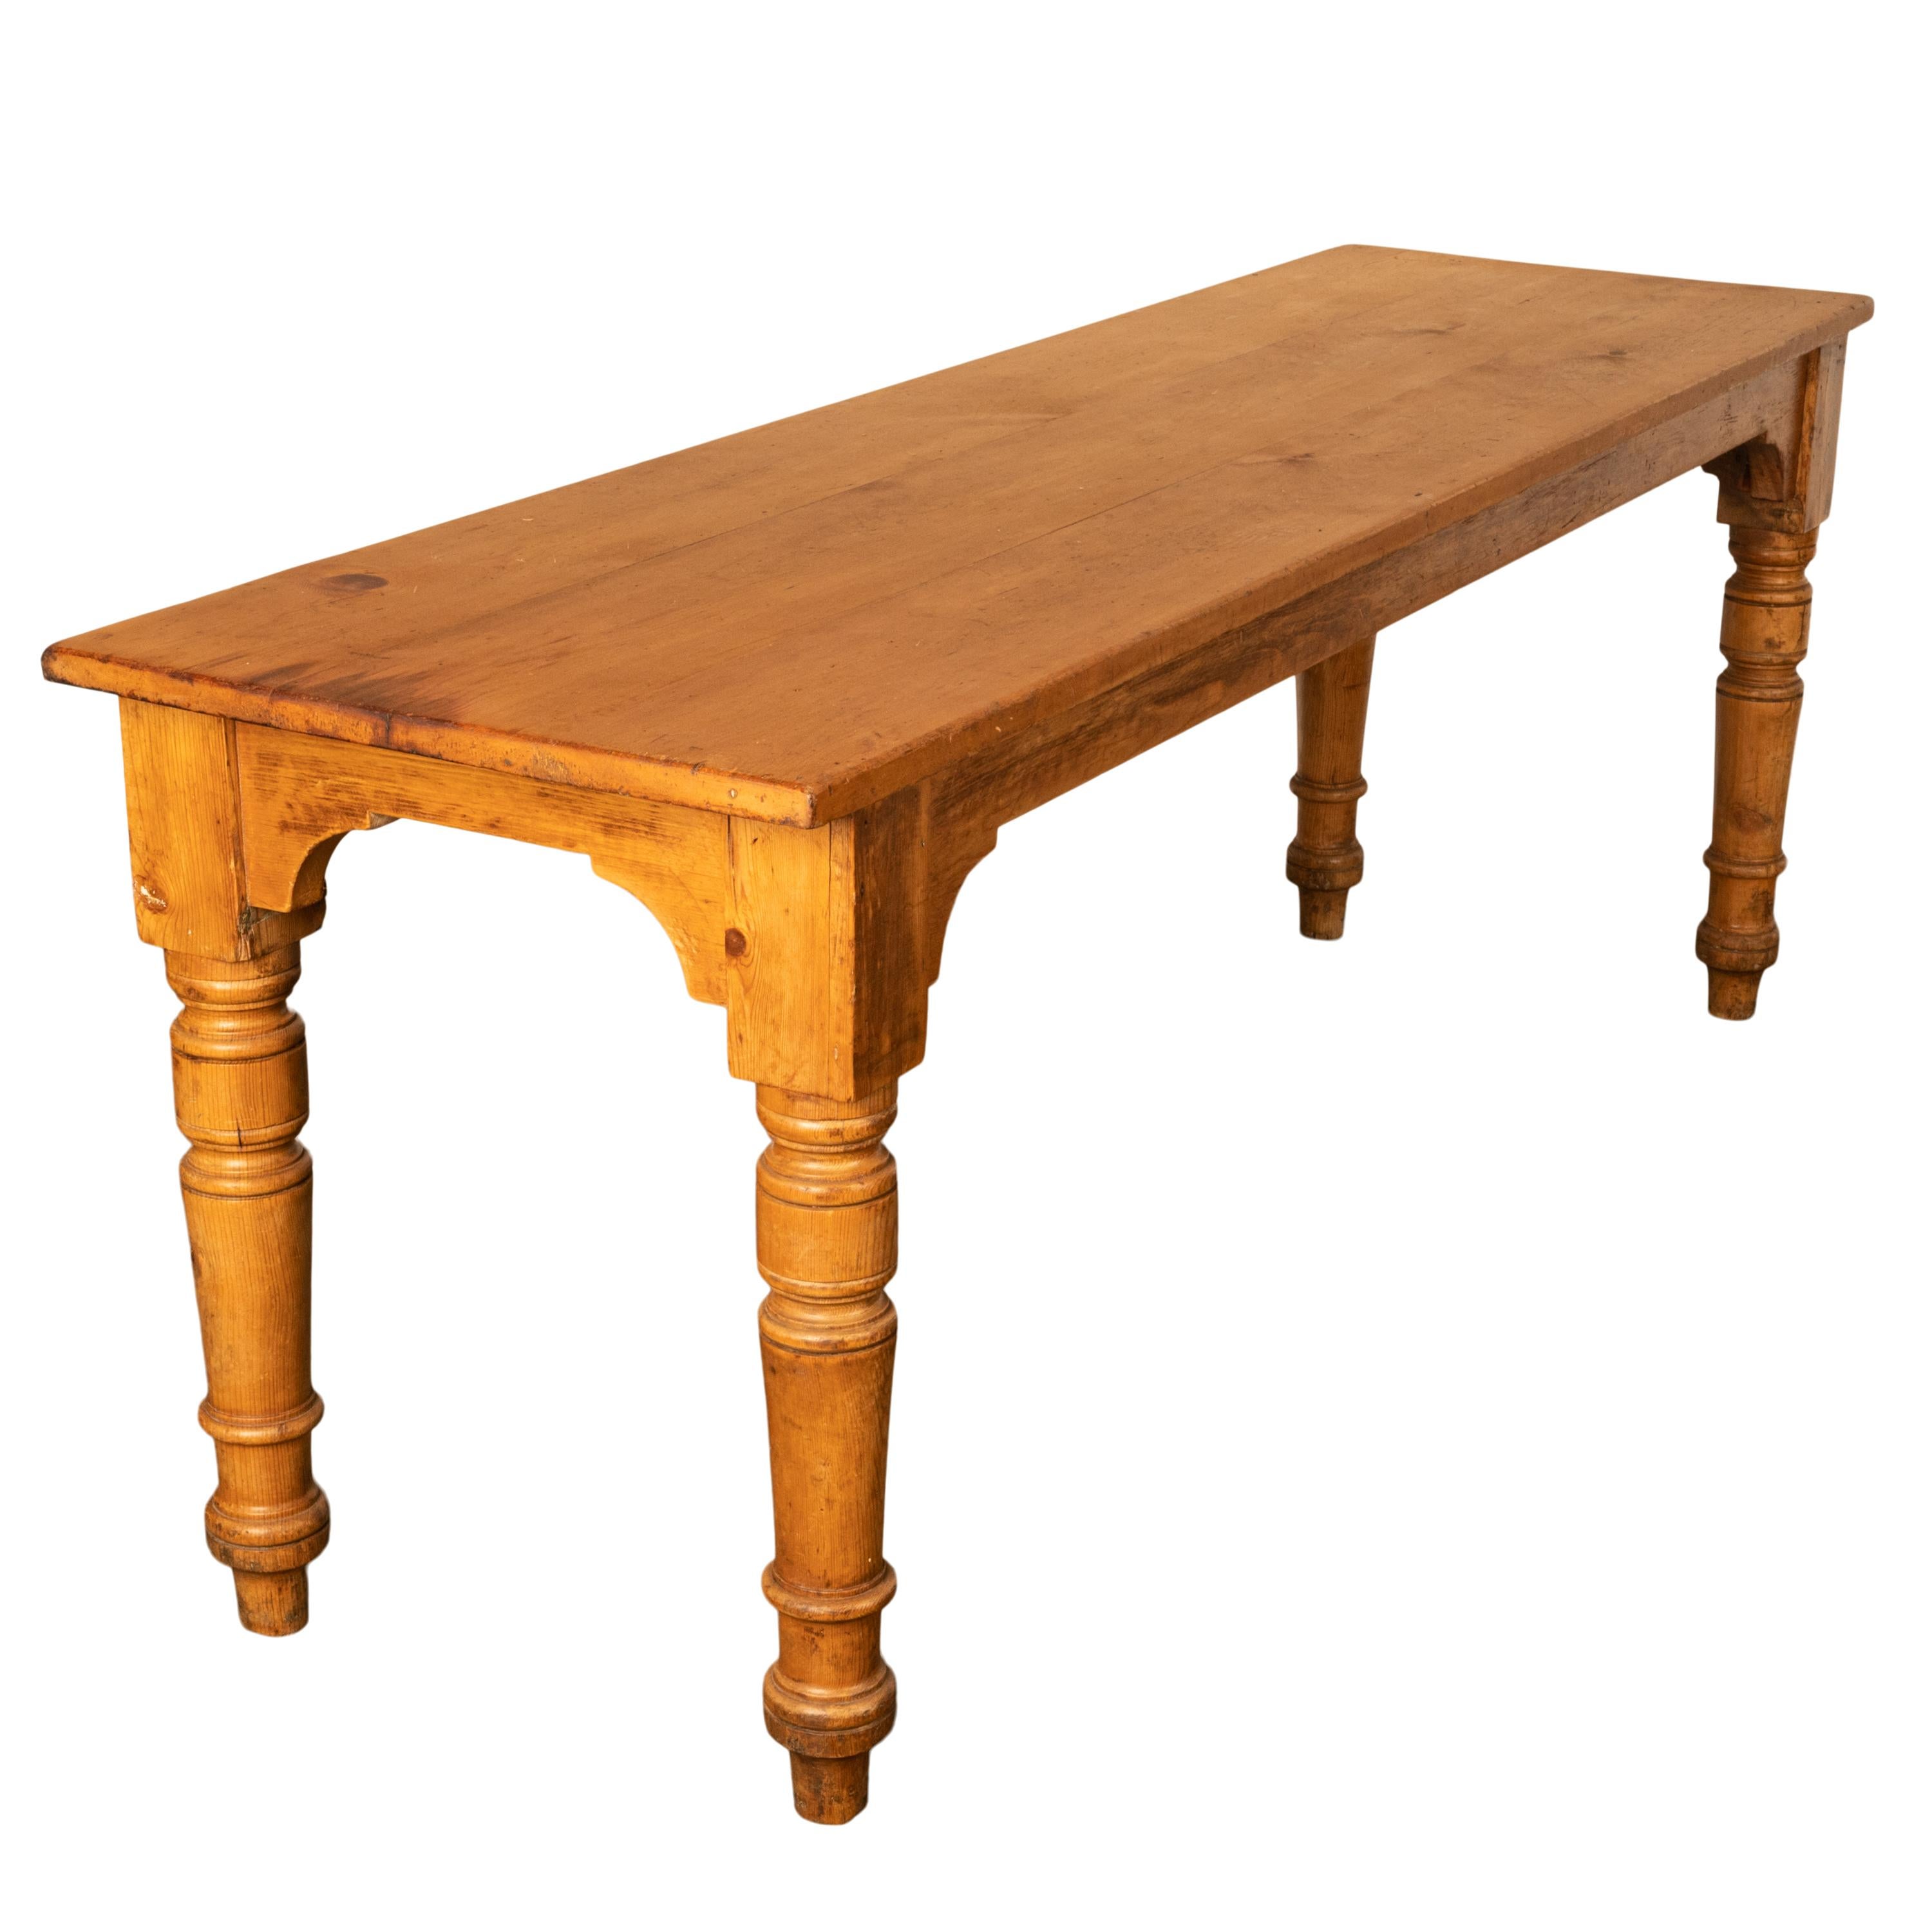 Antique 19th Century English Pine Country Farmhouse 8 seat Dining Table 1860 For Sale 4